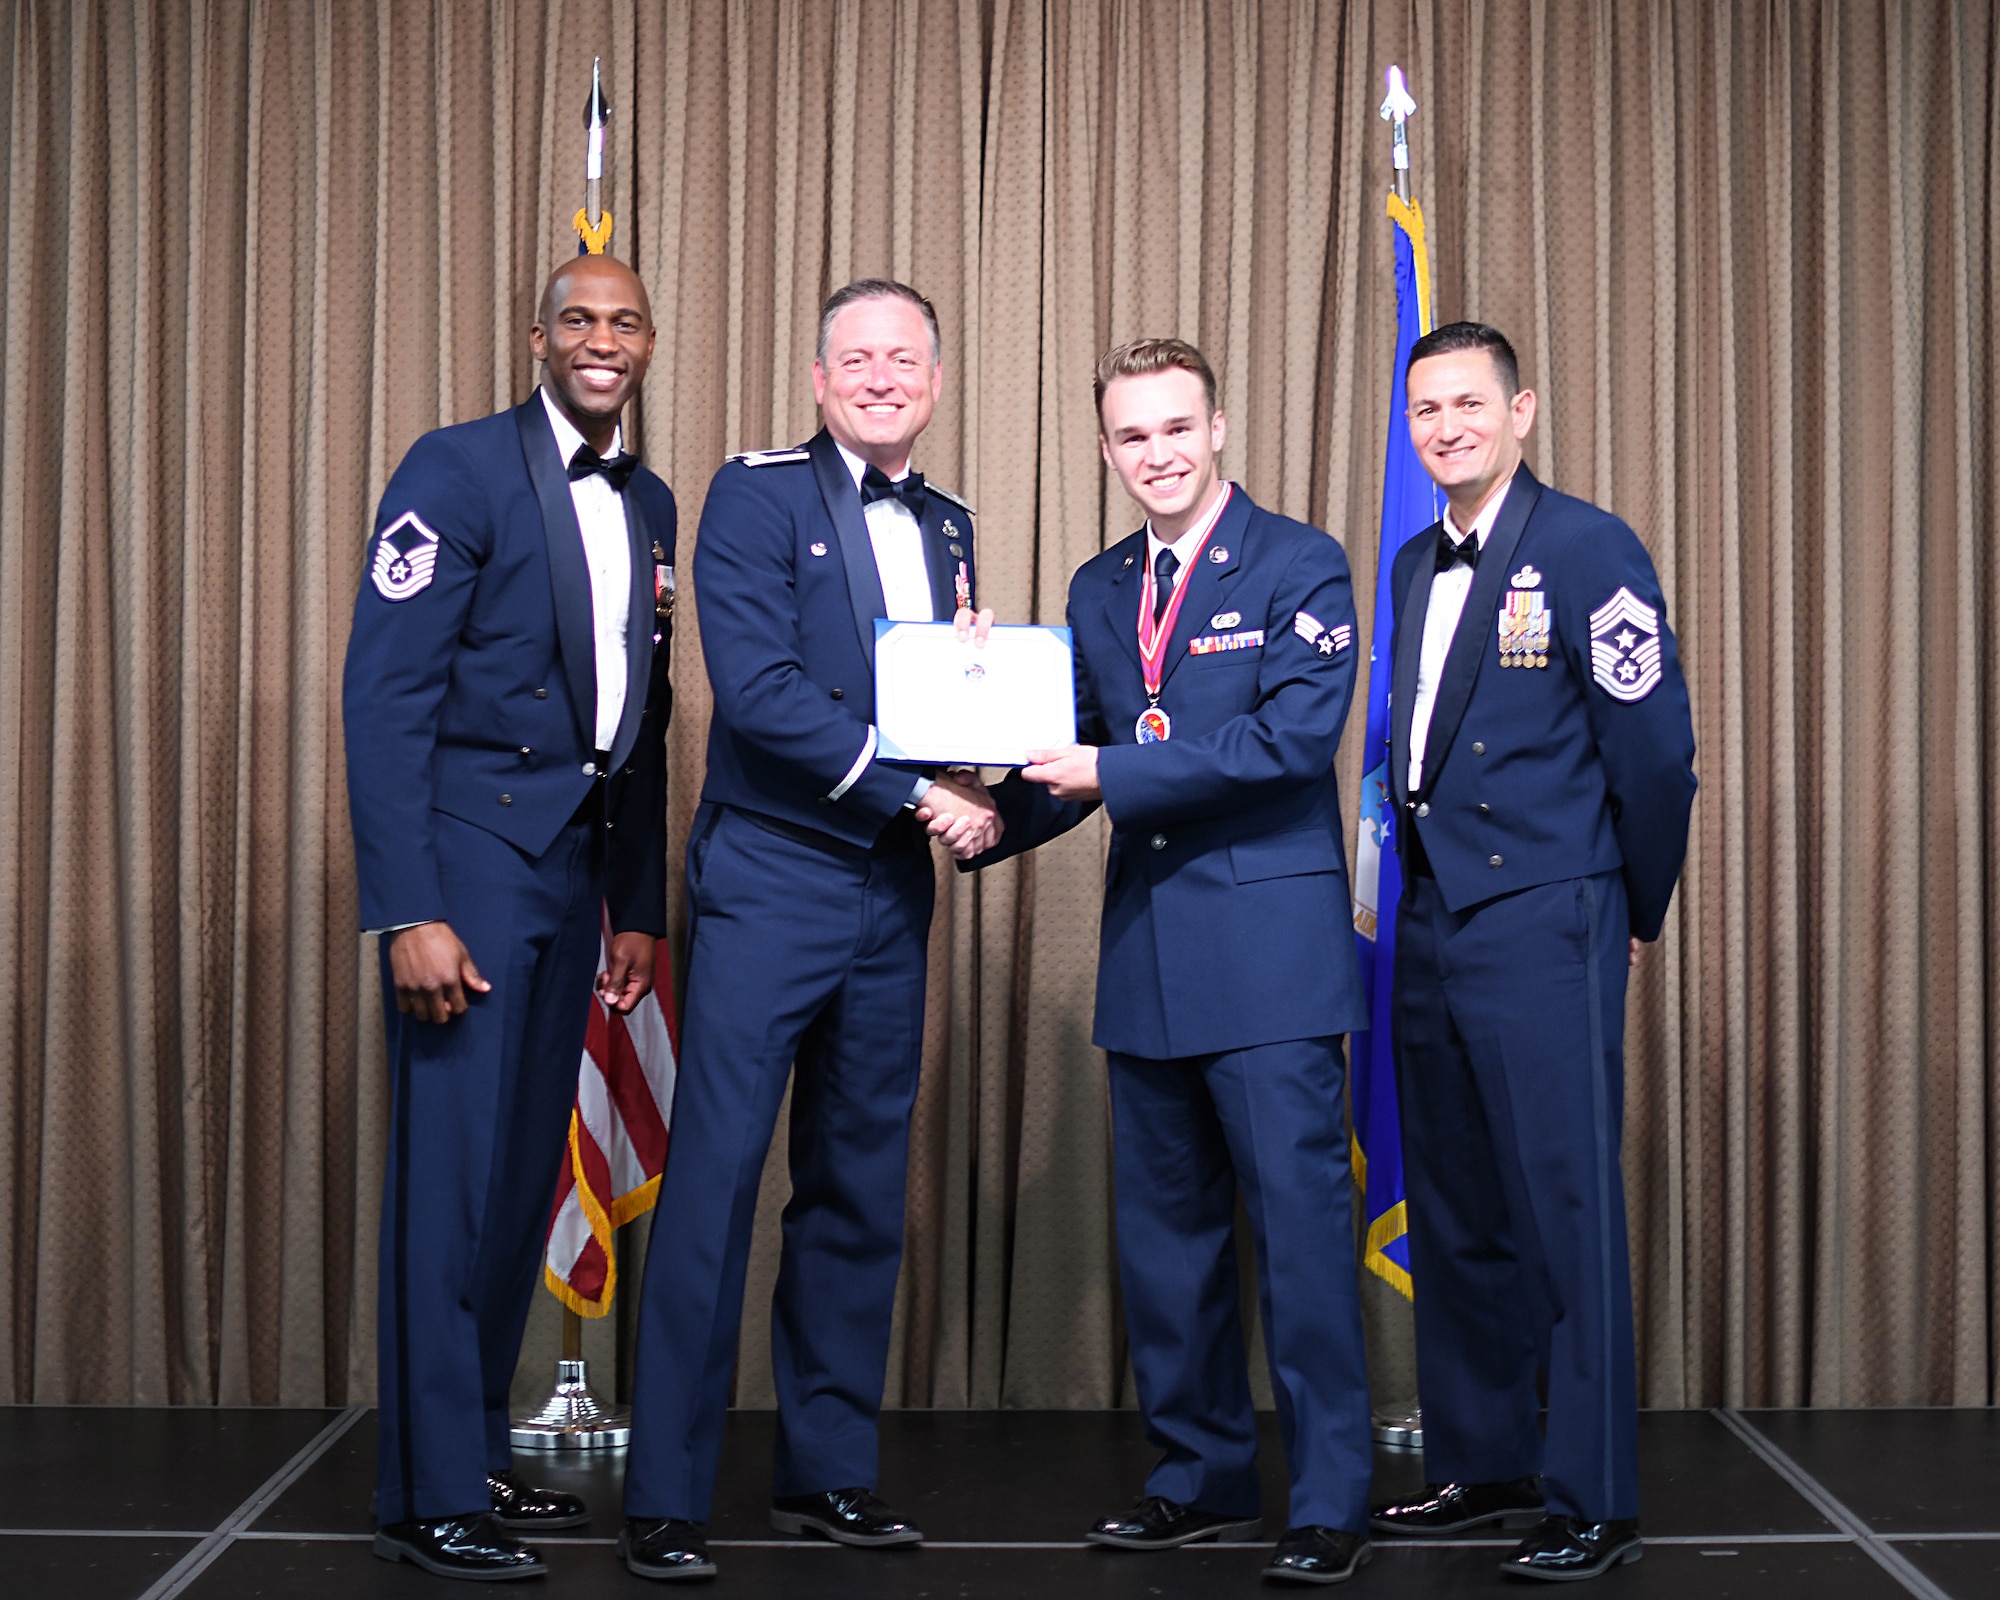 Col. Benjamin Spencer, 319th Air Base Wing commander, presents diploma to SrA Robert Olsen, Etchberger Airman Leadership School graduate, June 20, 2019, on Grand Forks Air Force Base, North Dakota. ALS graduation is the culmination of the first level of the Enlisted Professional Military Education continuum directed toward preparing upcoming noncommissioned officers with leadership skills for their careers. (U.S. Air Force photo by Senior Airman Elijaih Tiggs)